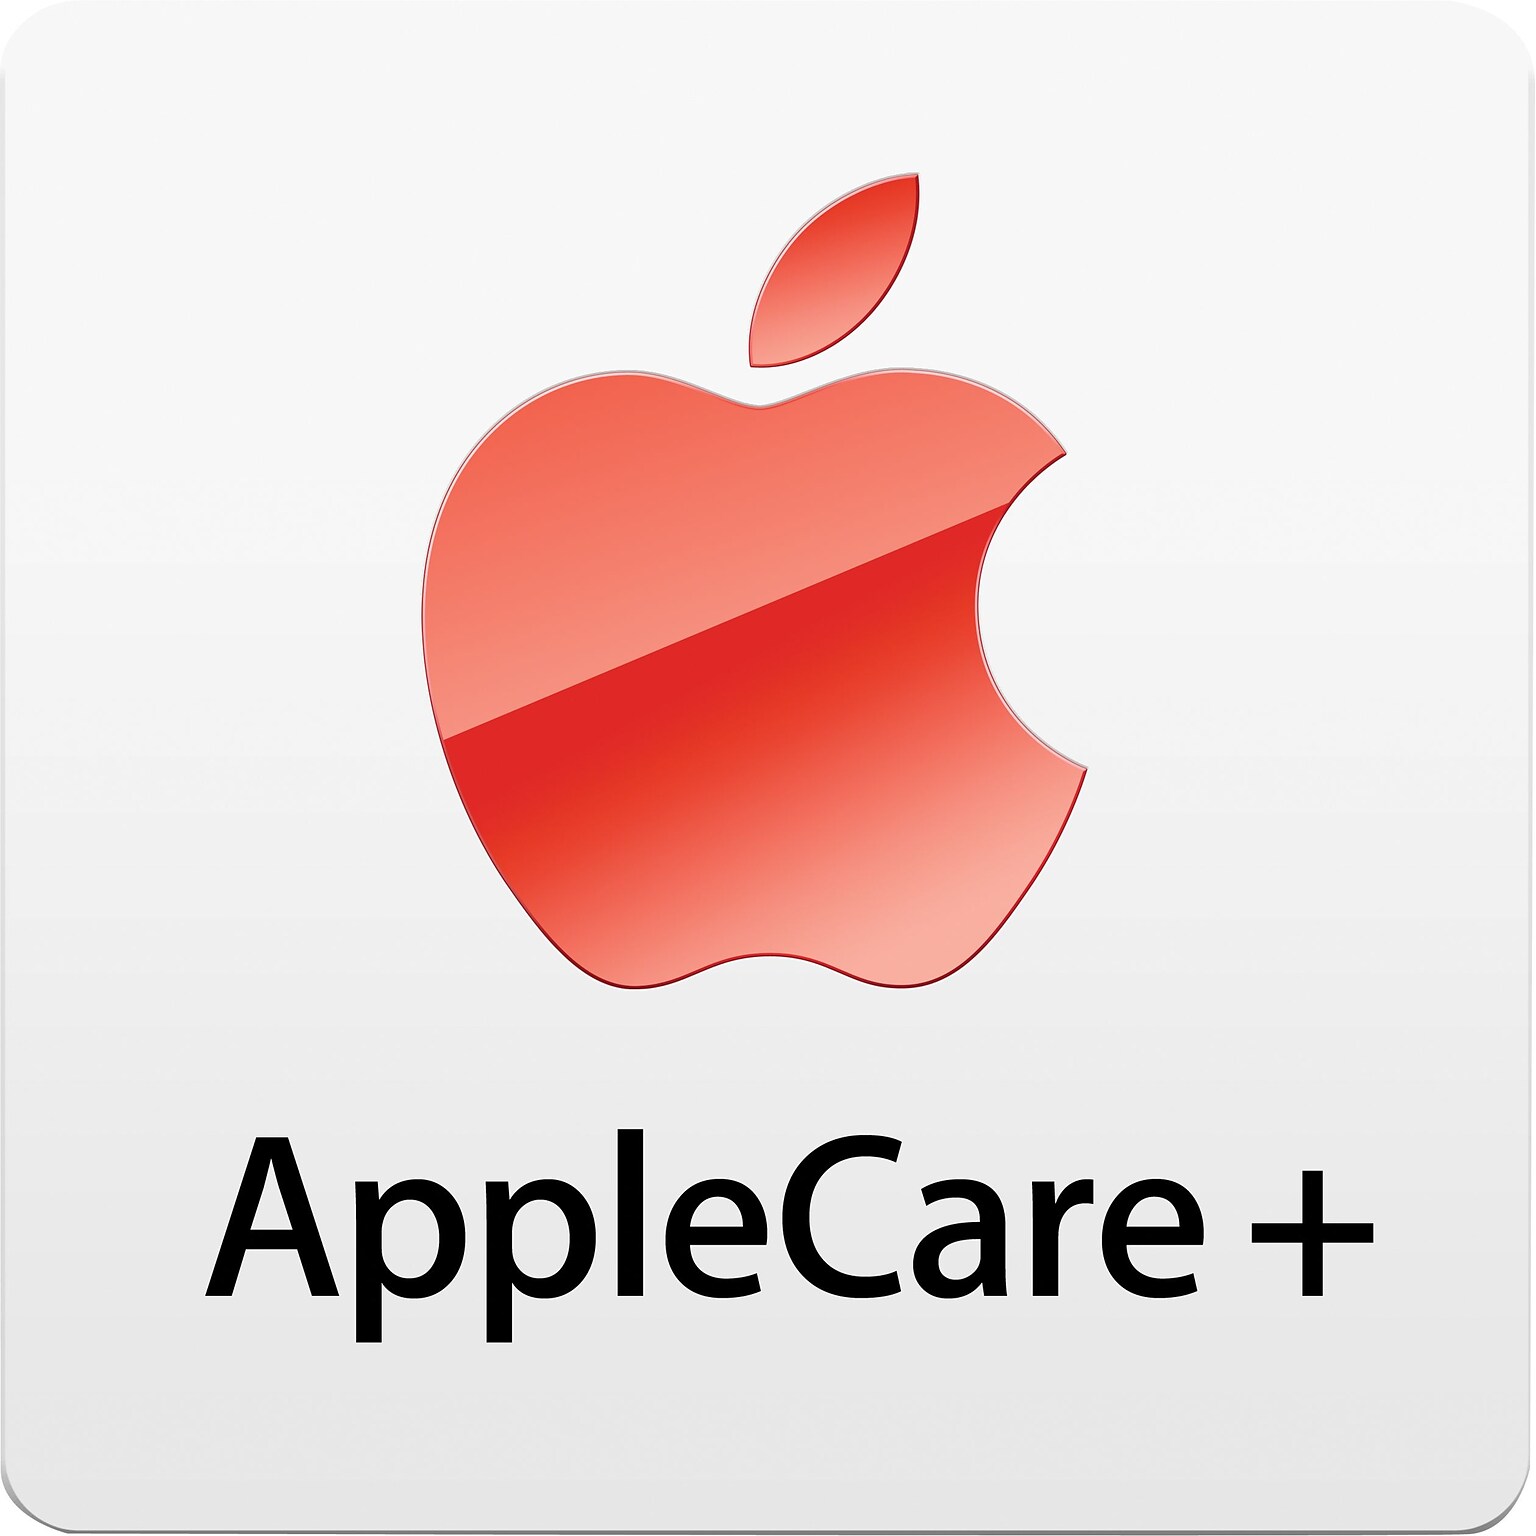 AppleCare+ 2-Year Protection Plan for iPad Air with Retina Display, Wi-Fi + Cellular (Verizon Wireless) 128 GB, Silver